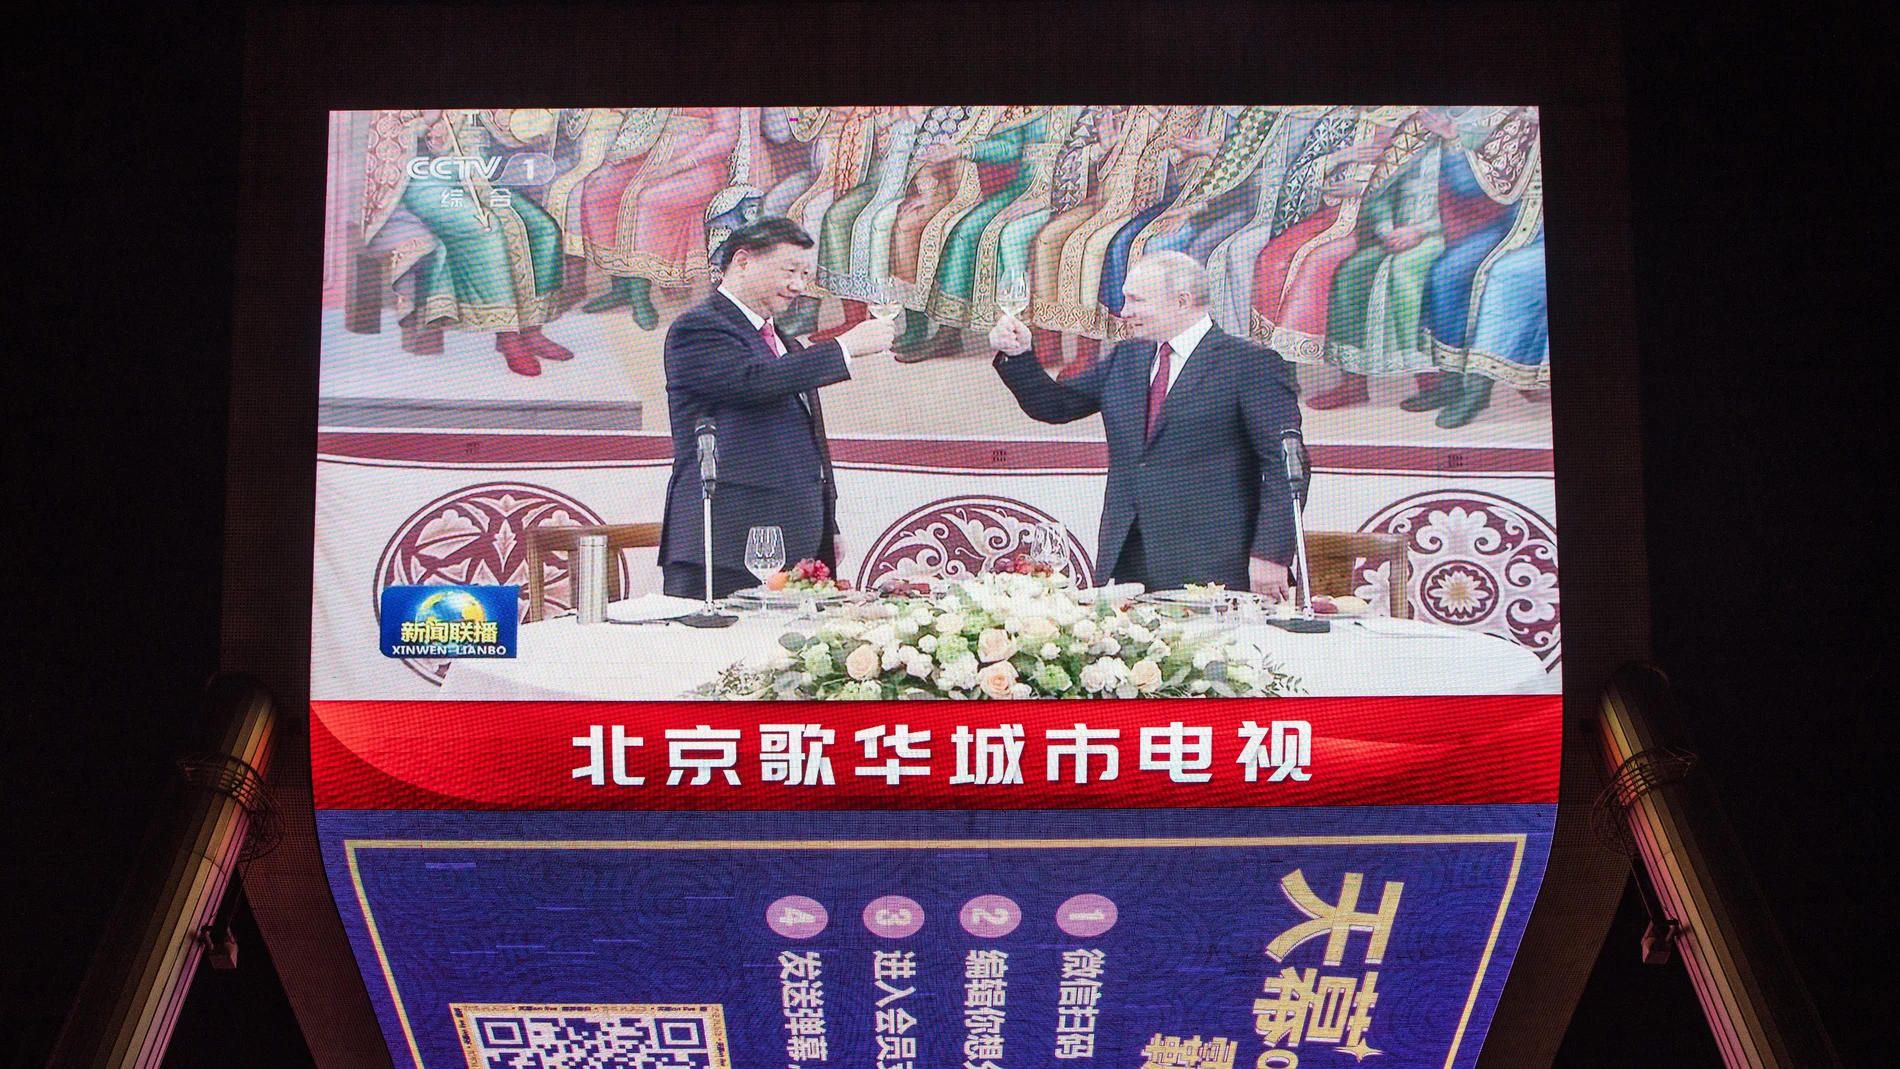 Beijing (China), 22/03/2023.- A screen shows Chinese President Xi Jinping raising a glass with Russian President Vladimir Putin during their meeting in Moscow the previous day, in Beijing, China, 22 March 2023. The Chinese head of state is on a three-day state visit to Russia. (Rusia, Moscú) EFE/EPA/WU HAO